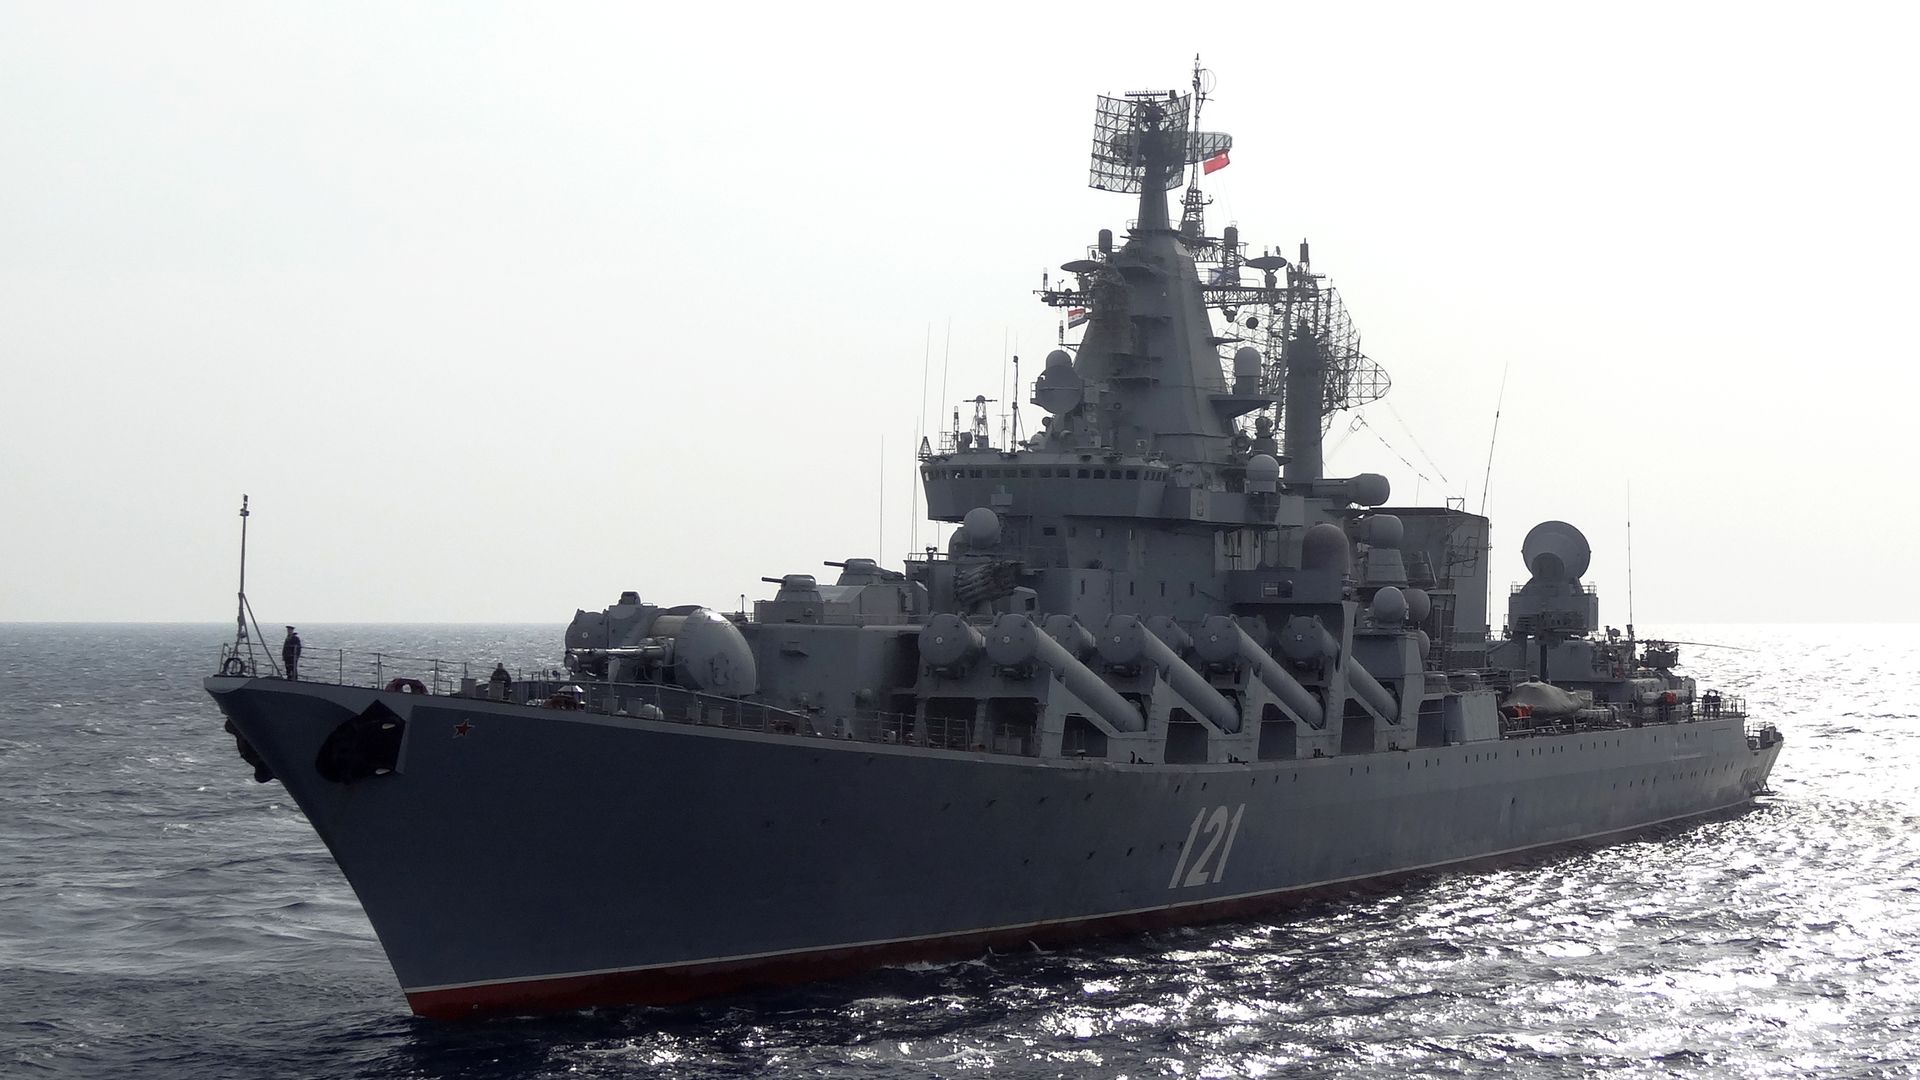 The former Russian missile cruiser Moskva patrolling the Mediterranean Sea in December 2015.